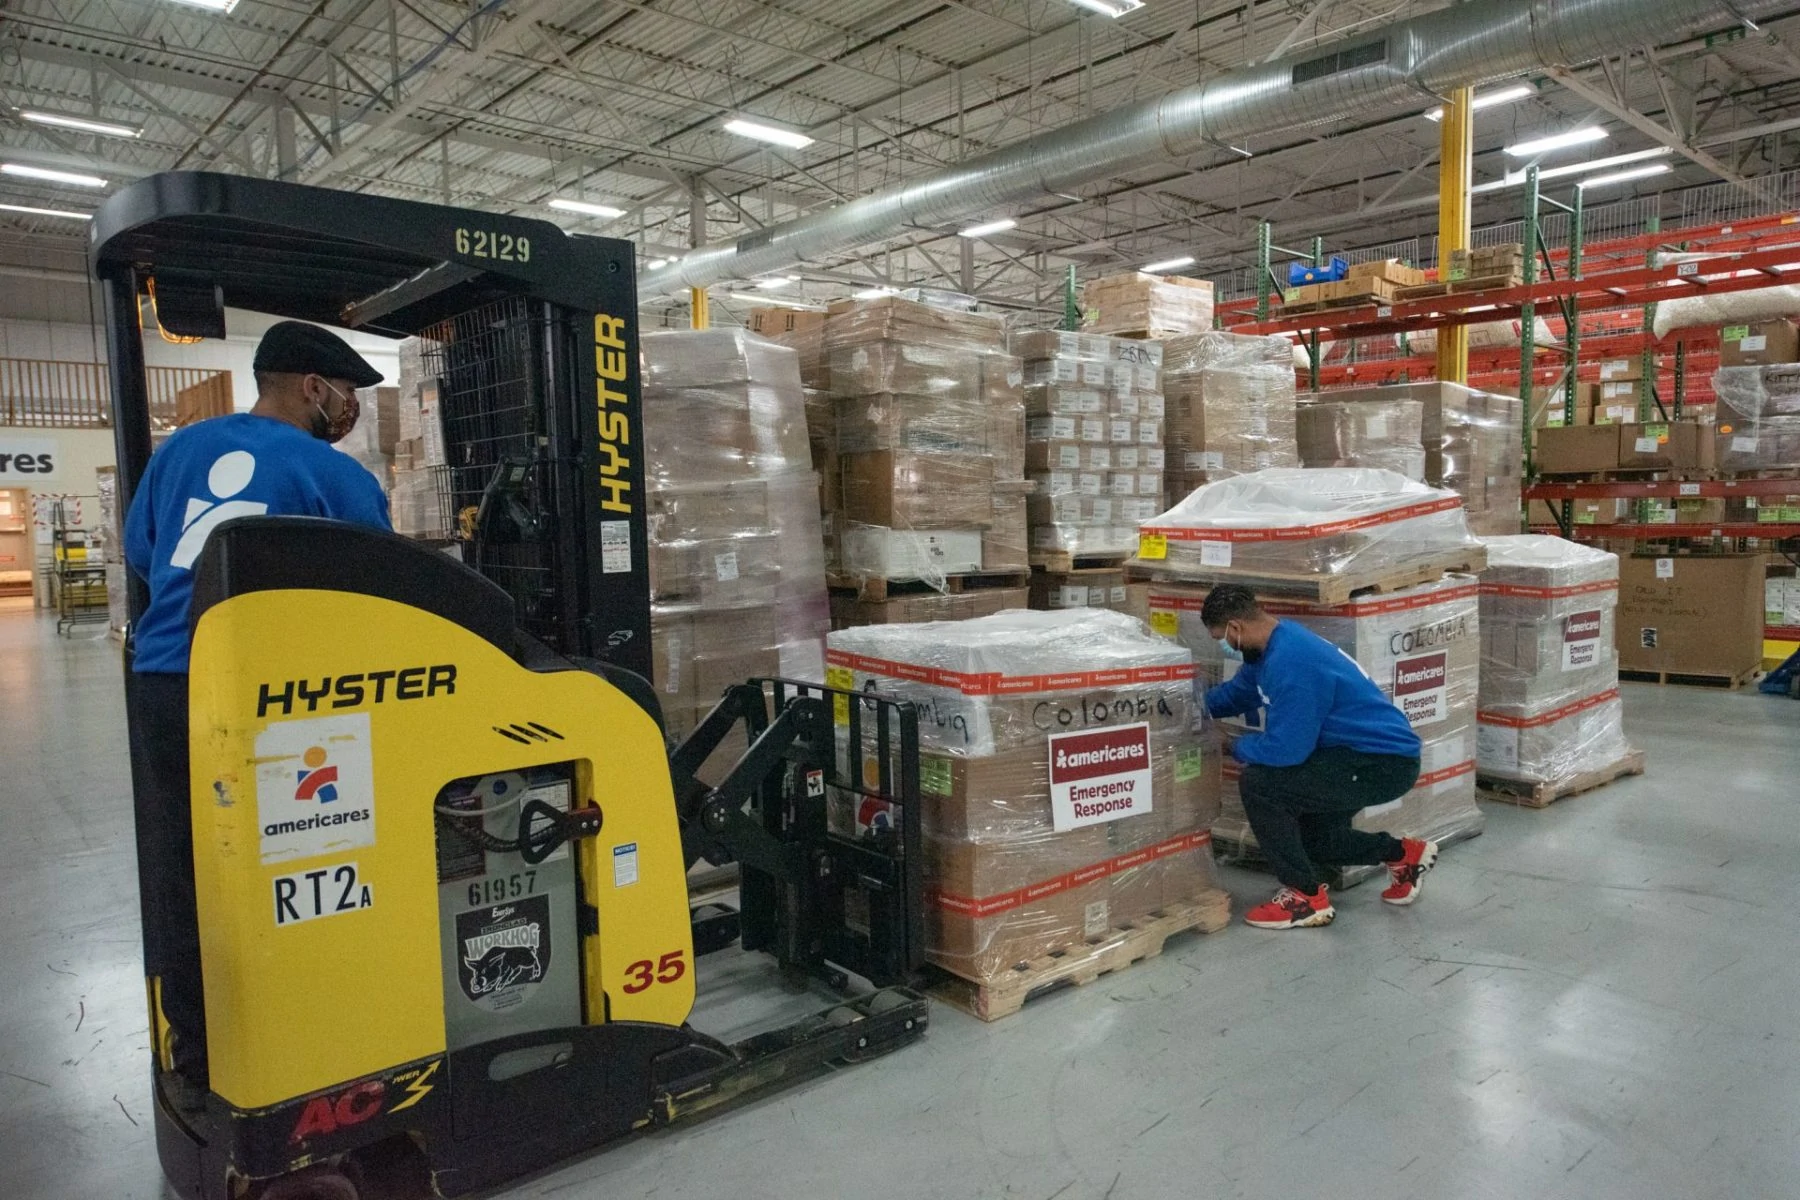 Two Americares staff members prepare an emergency shipment of PPE and hygiene supplies for shipment to Colombia from the Distribution Center.